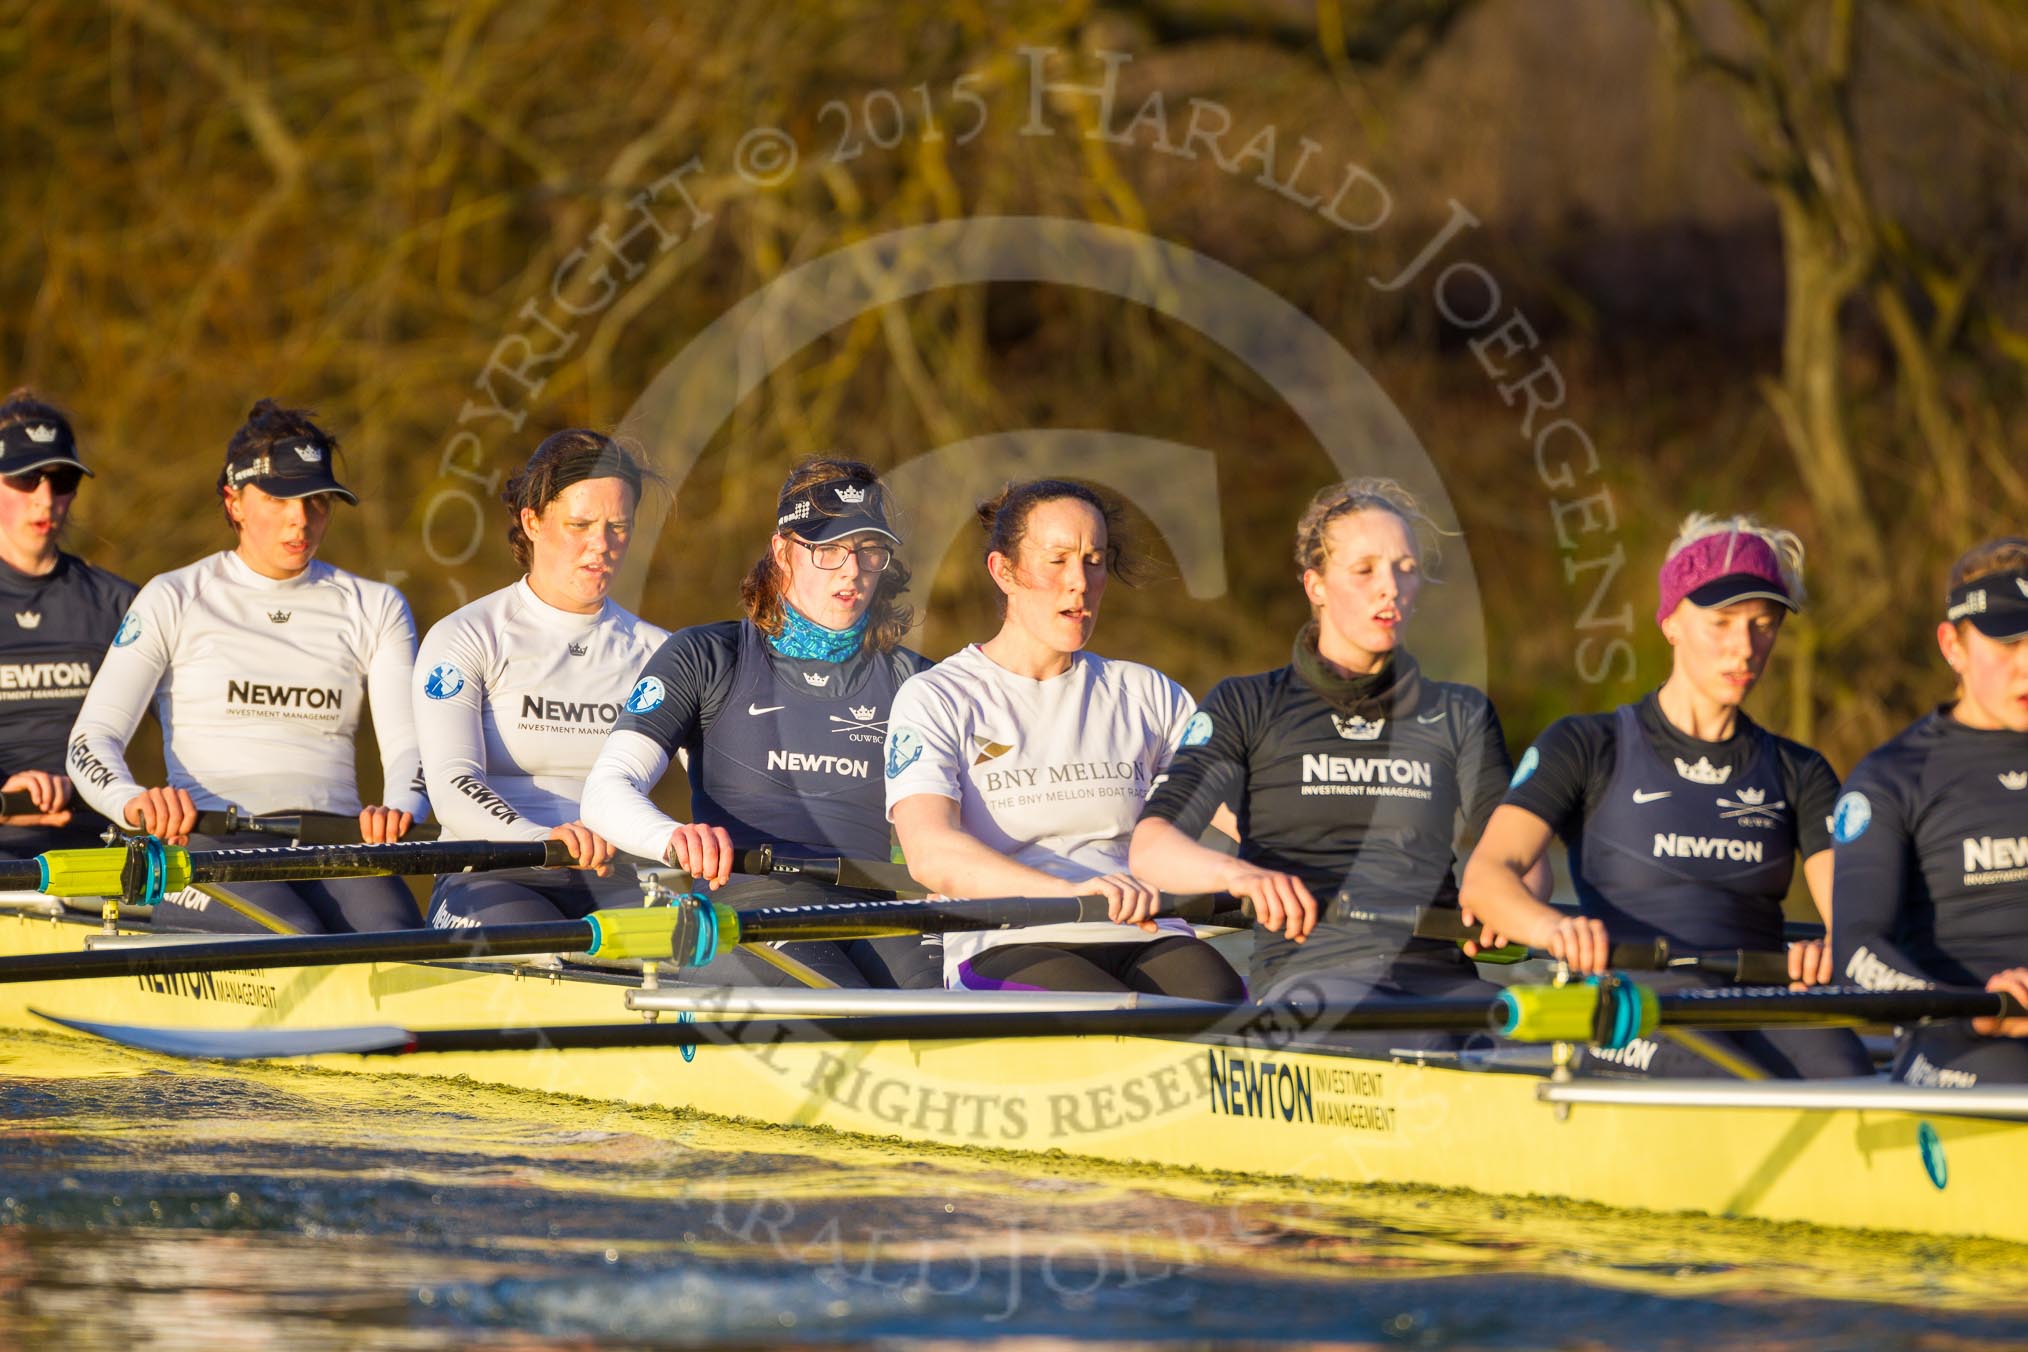 The Boat Race season 2015: OUWBC training Wallingford.

Wallingford,

United Kingdom,
on 04 March 2015 at 17:10, image #264